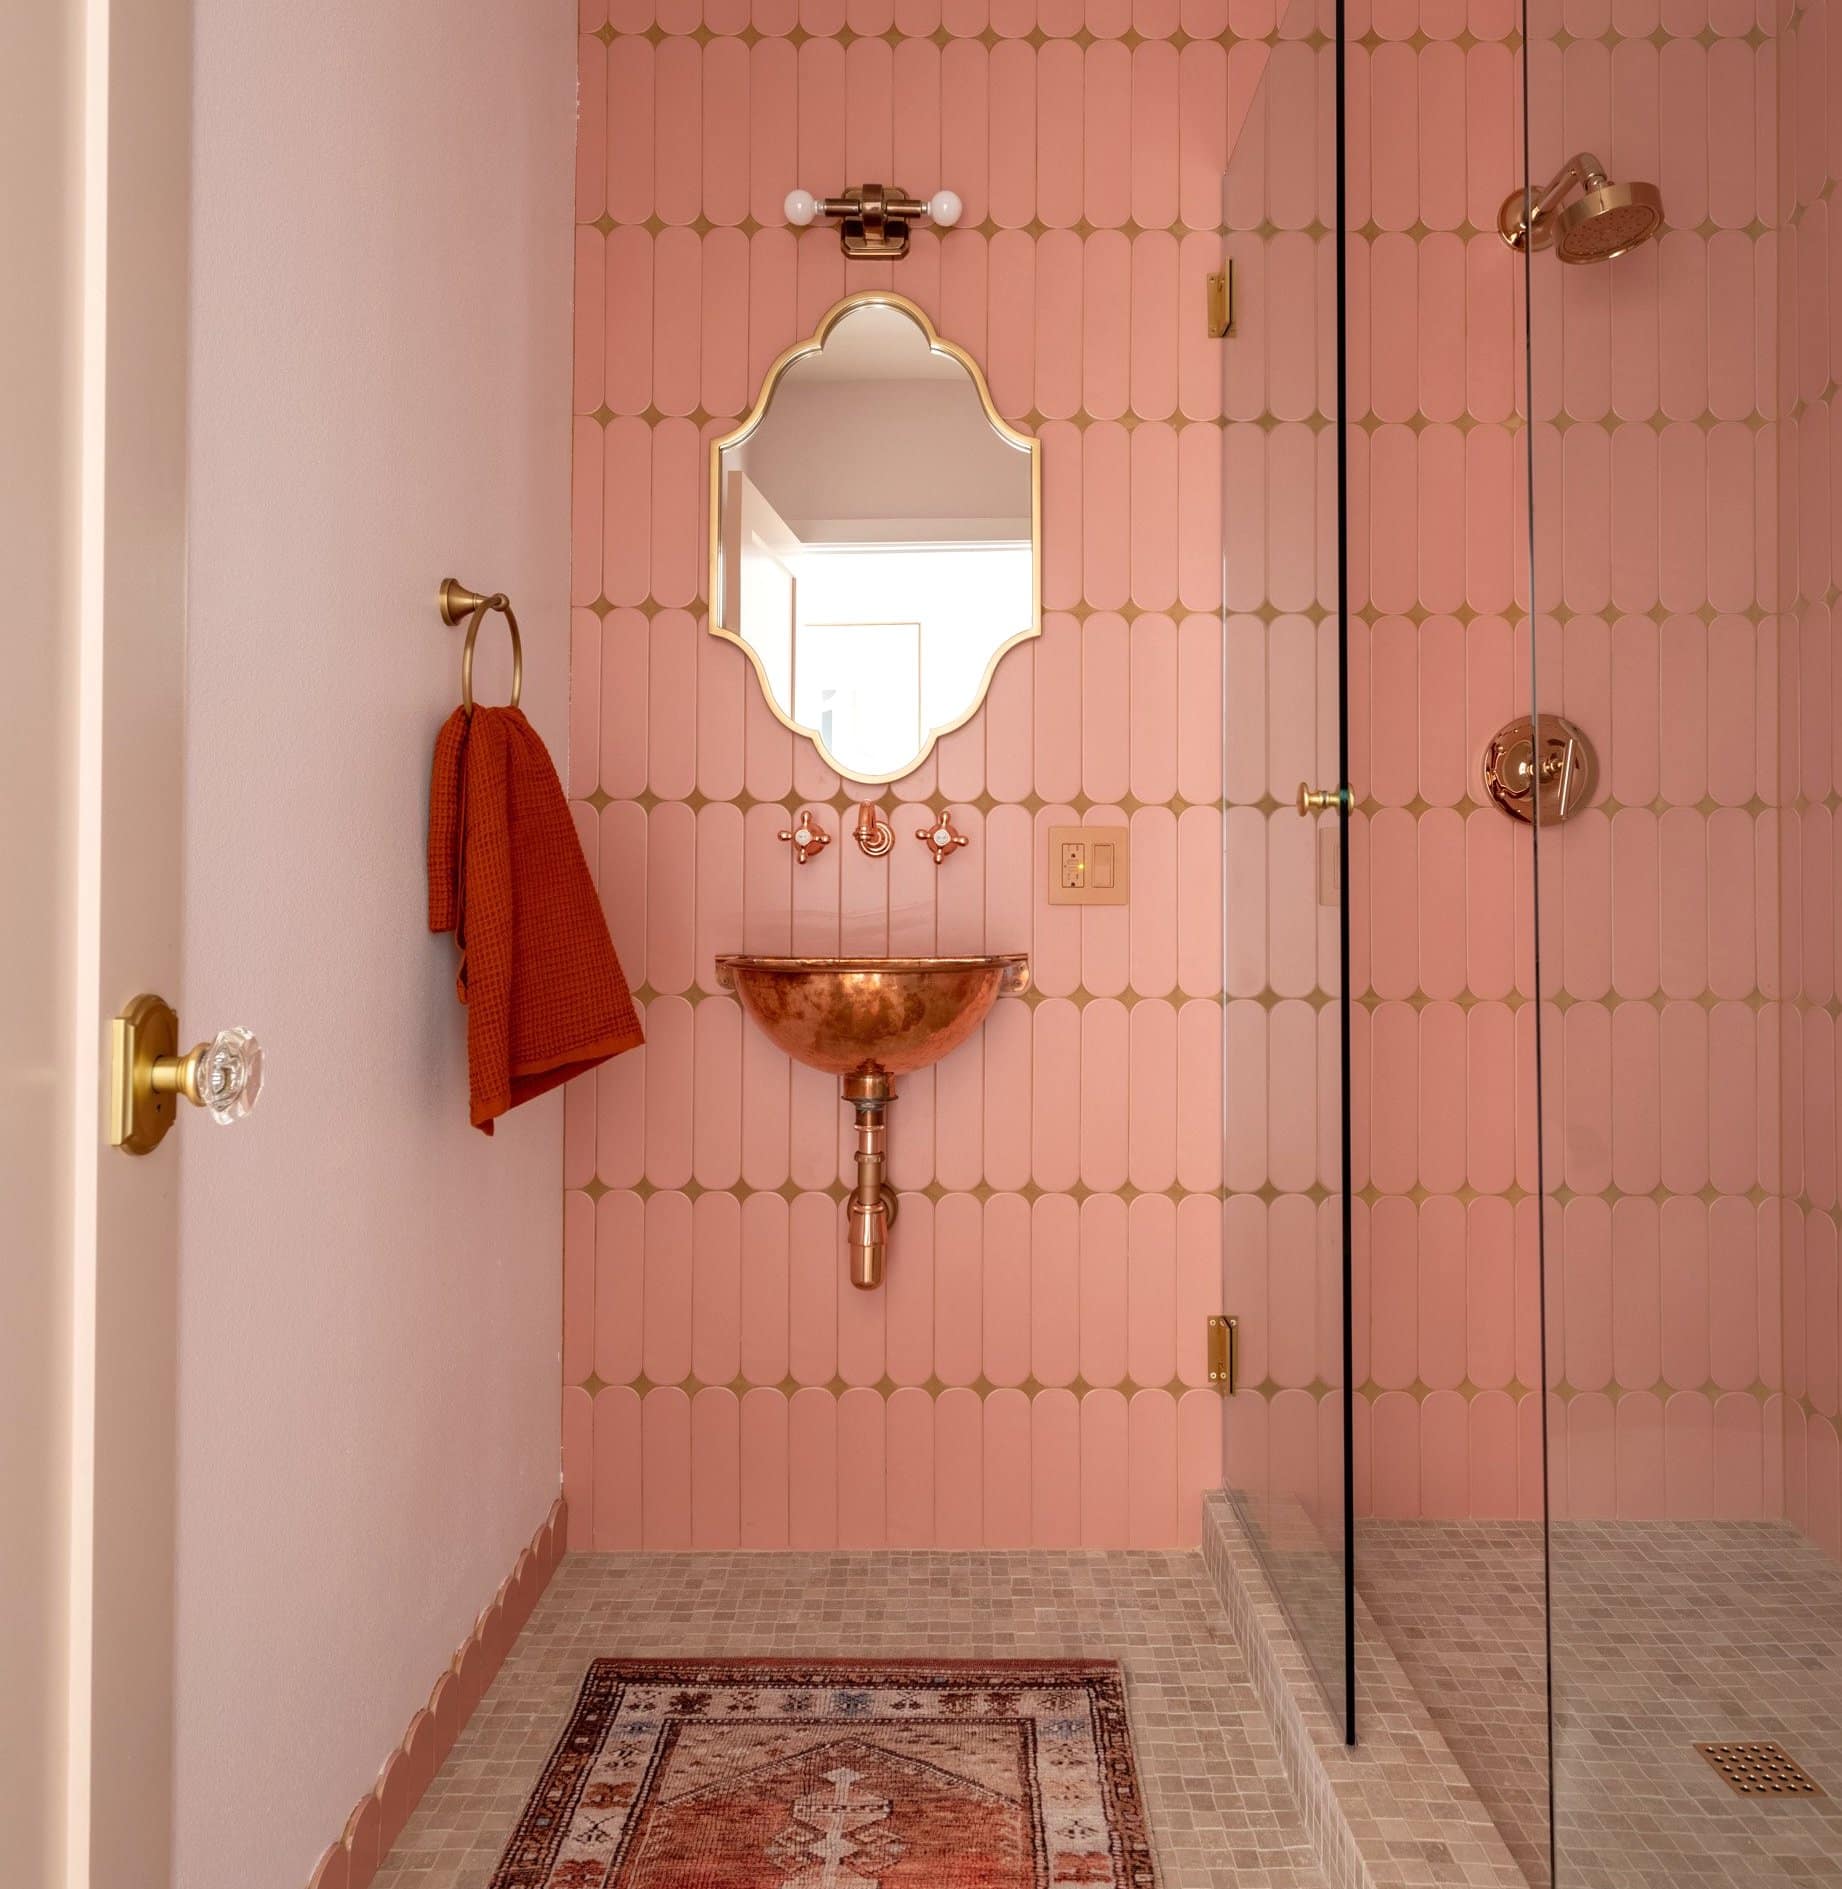 6 Pretty Pink Rooms Round Up – Interior Inspiration